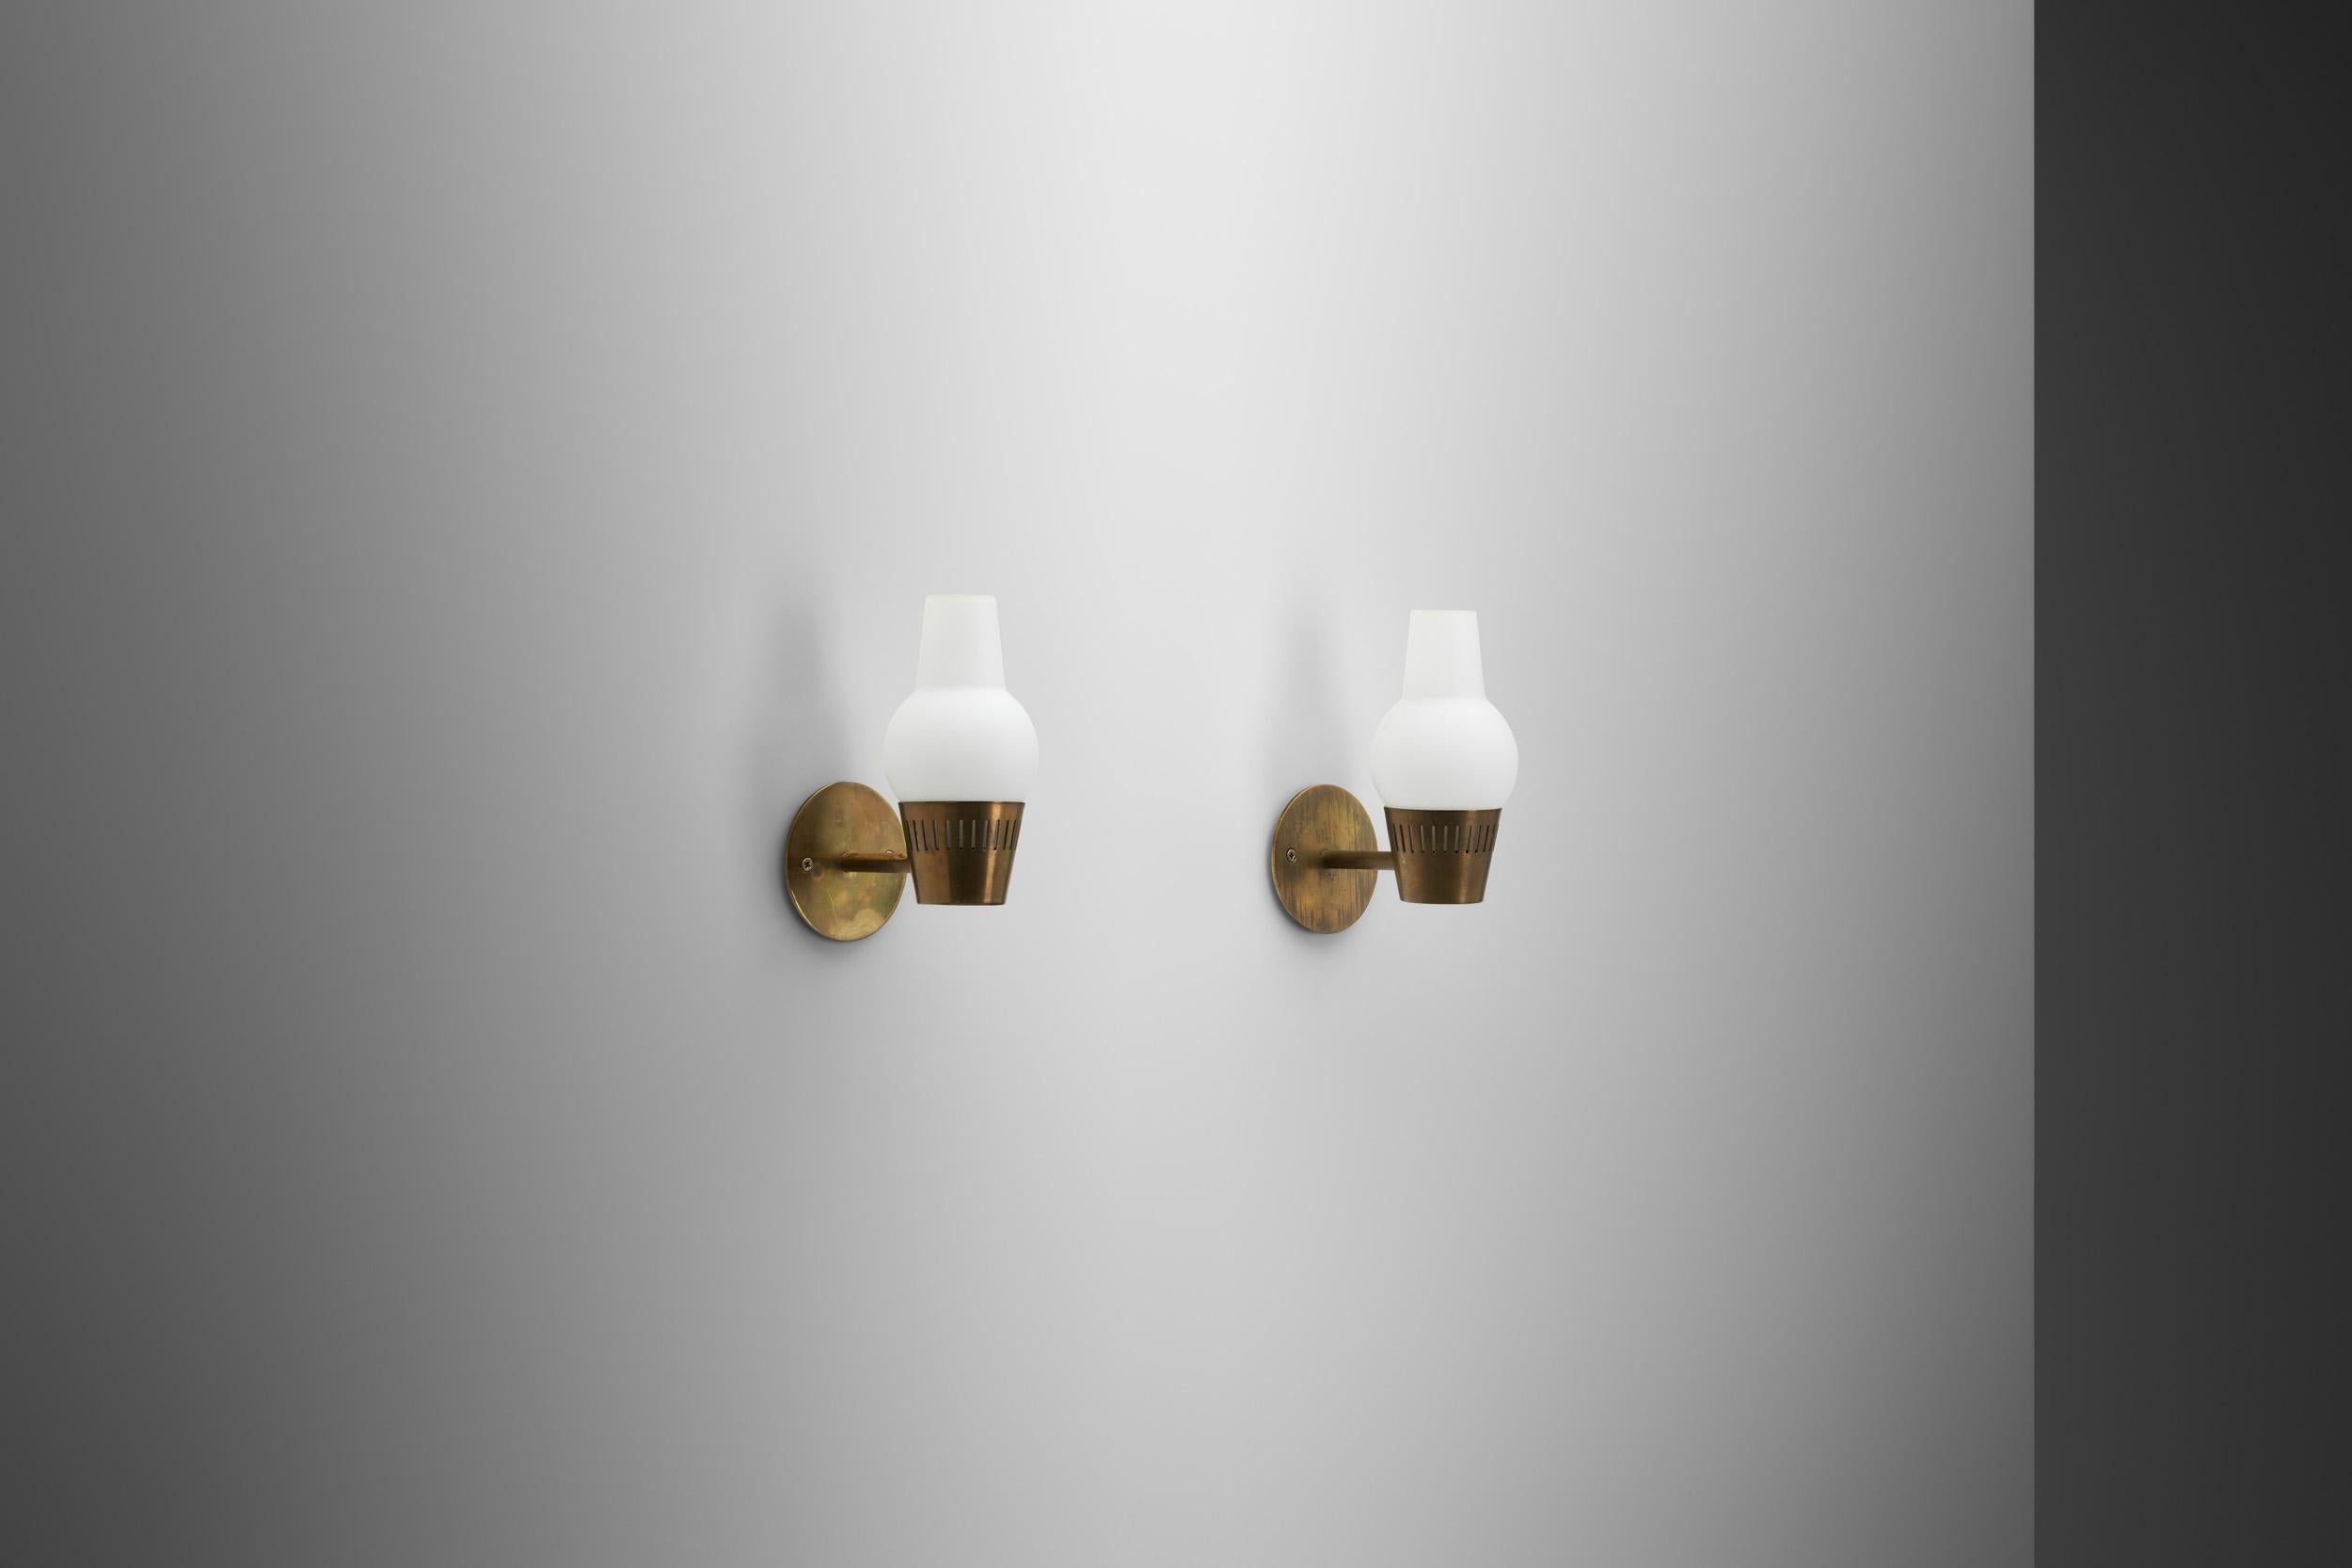 Mid-20th Century European Modern Brass and Opaque Matte Glass Wall Lamps, Europe 1960s For Sale